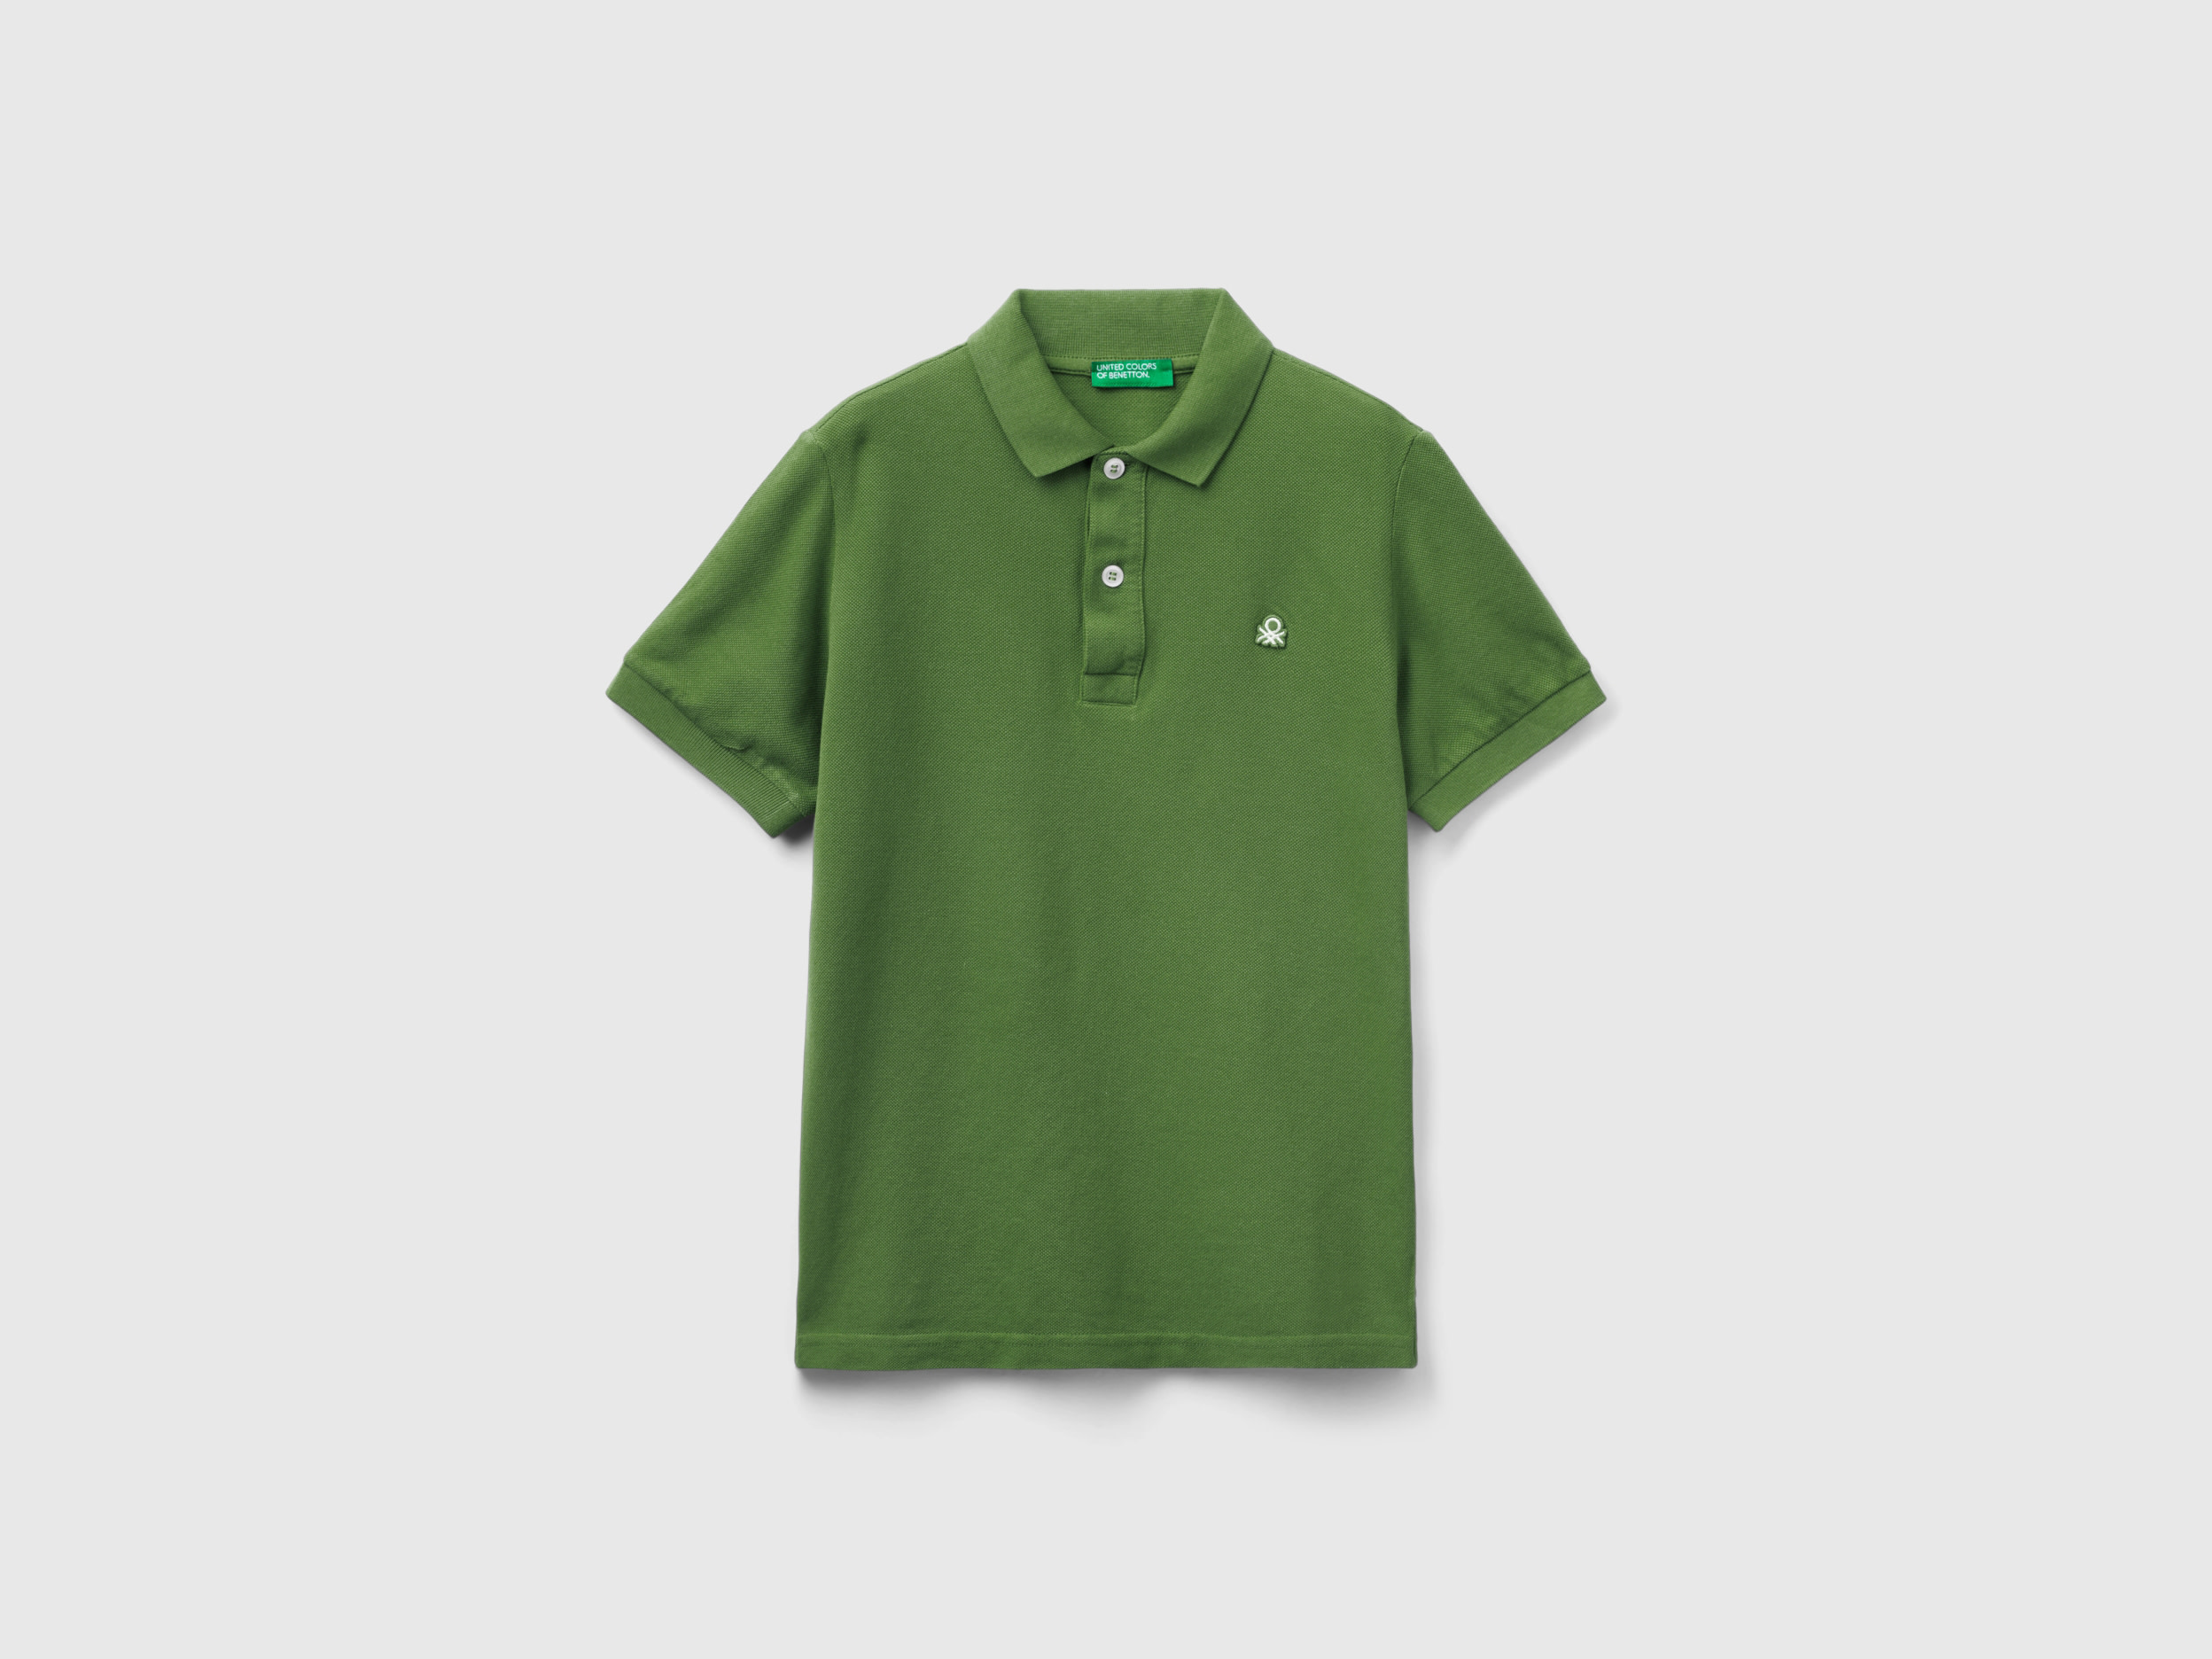 Image of Benetton, Slim Fit Polo In 100% Organic Cotton, size 3XL, Green, Kids